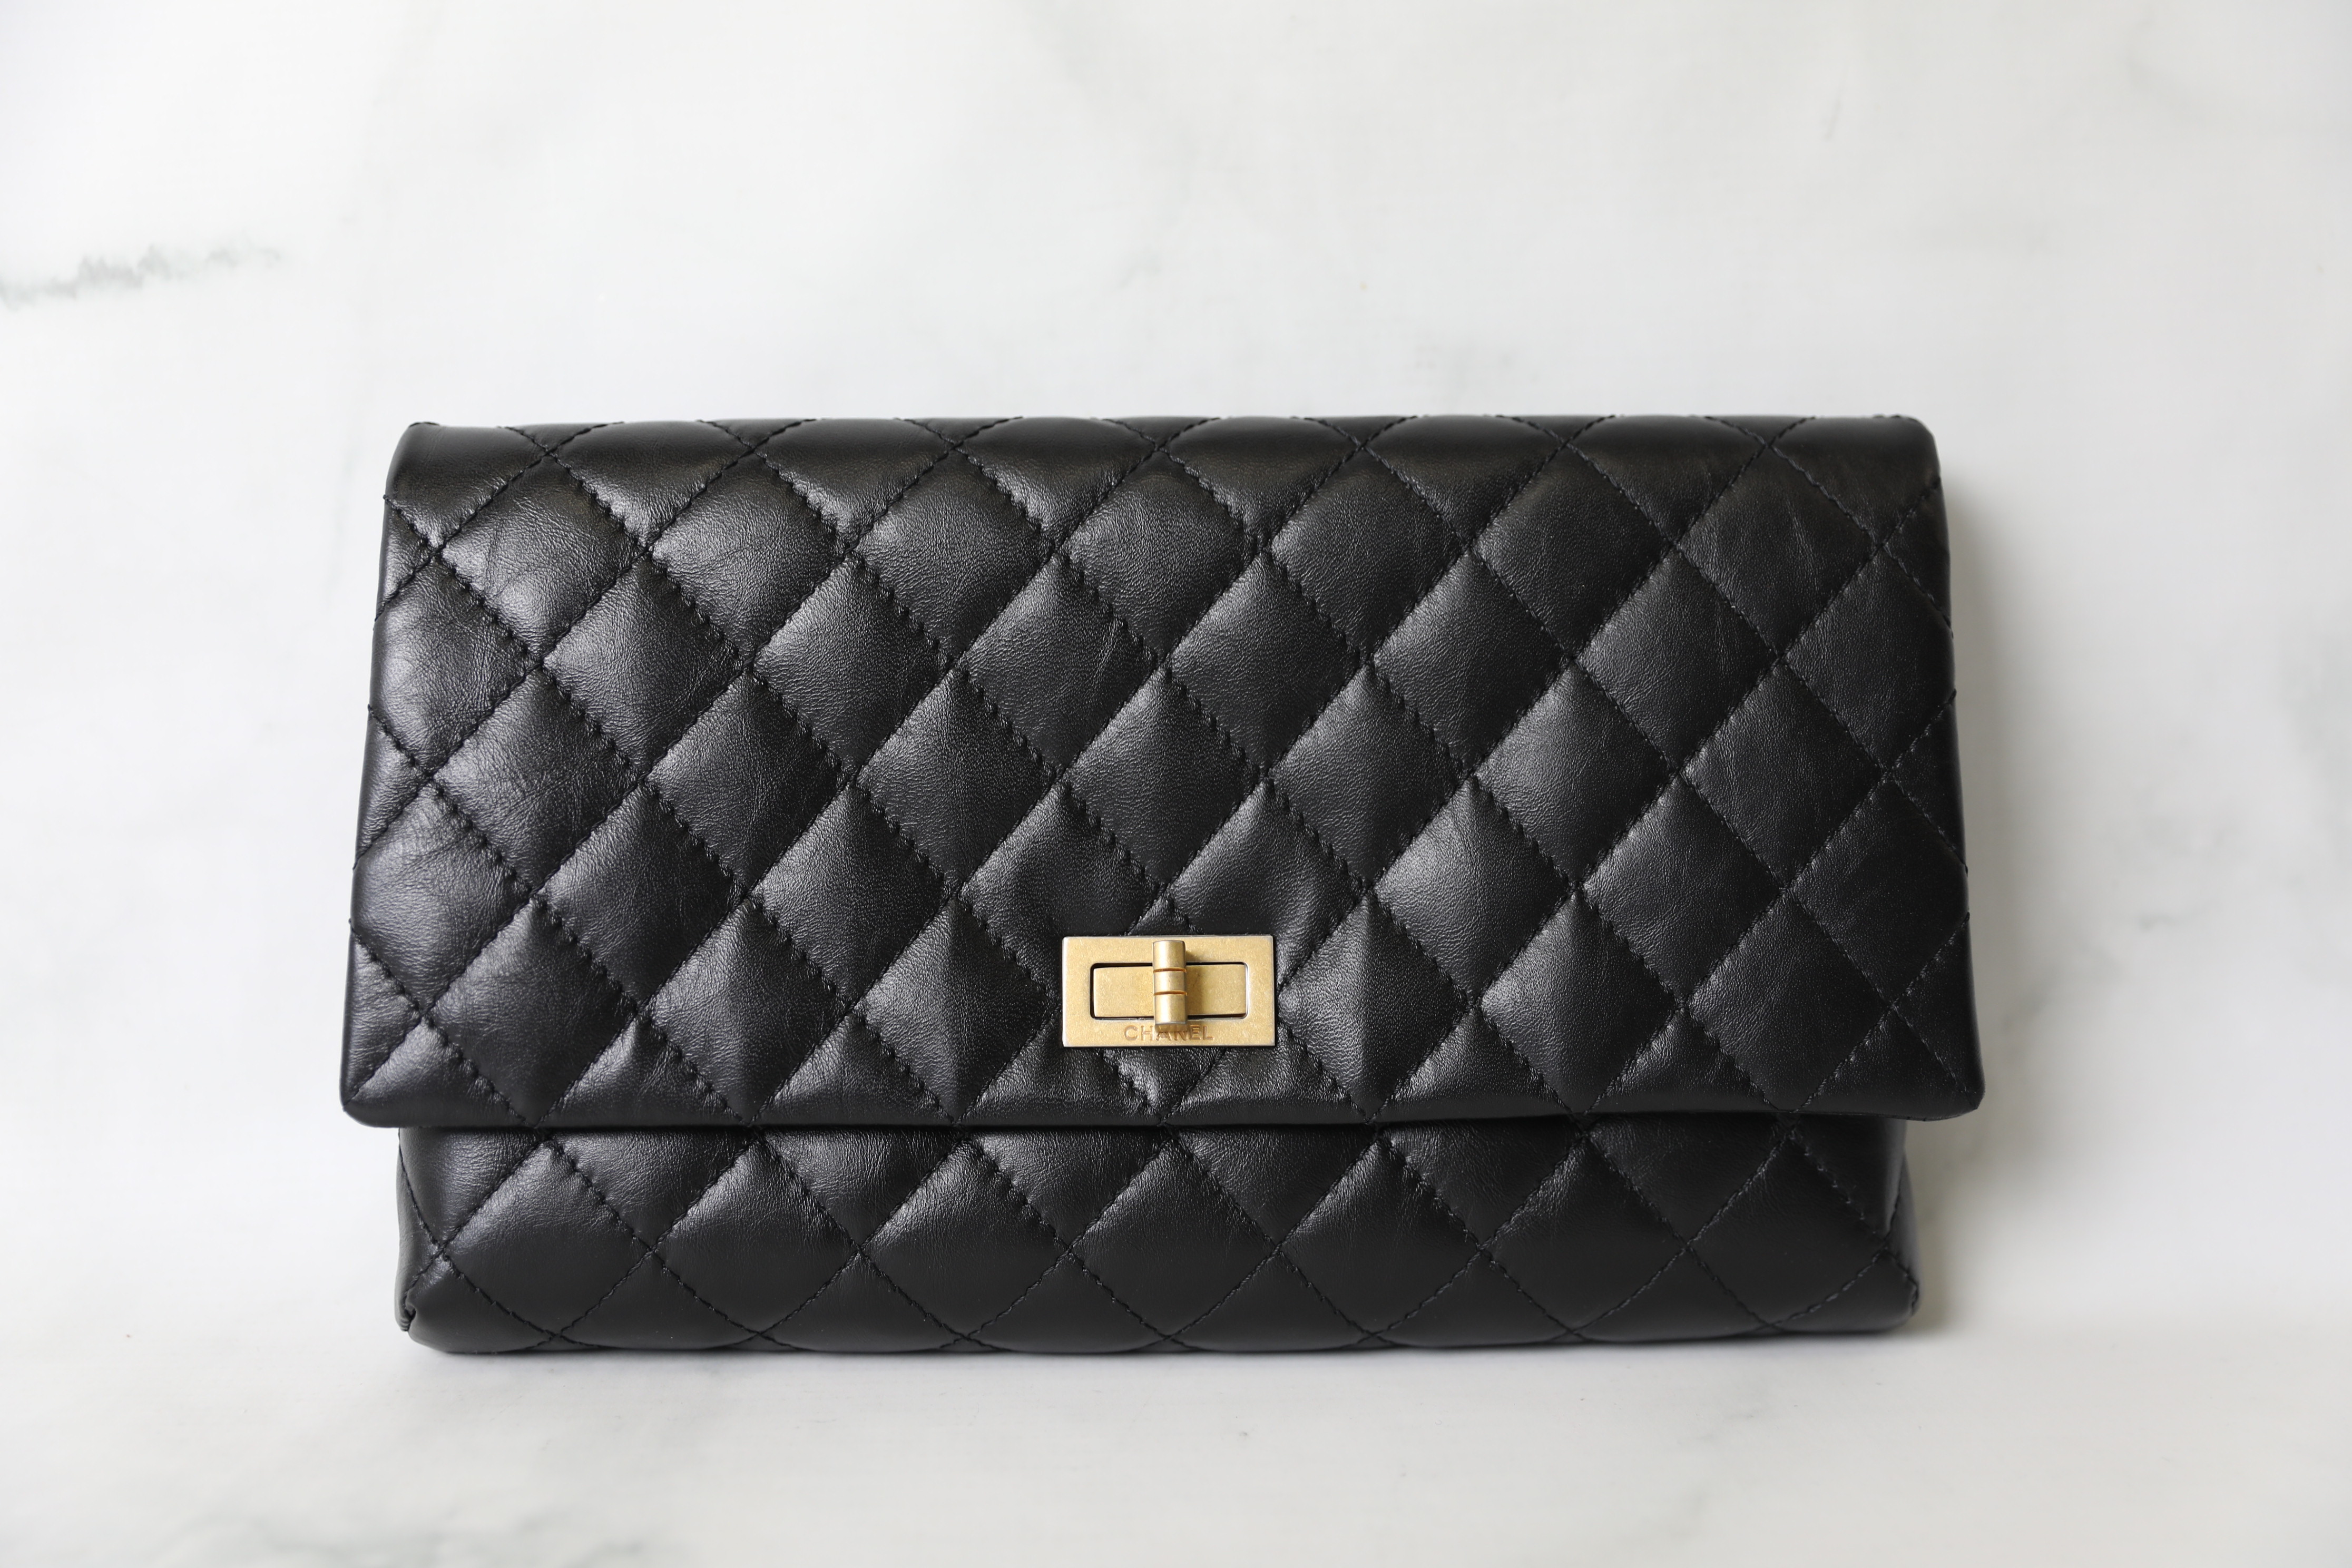 Chanel Reissue Clutch, Black Calfskin with Gold Hardware, New in